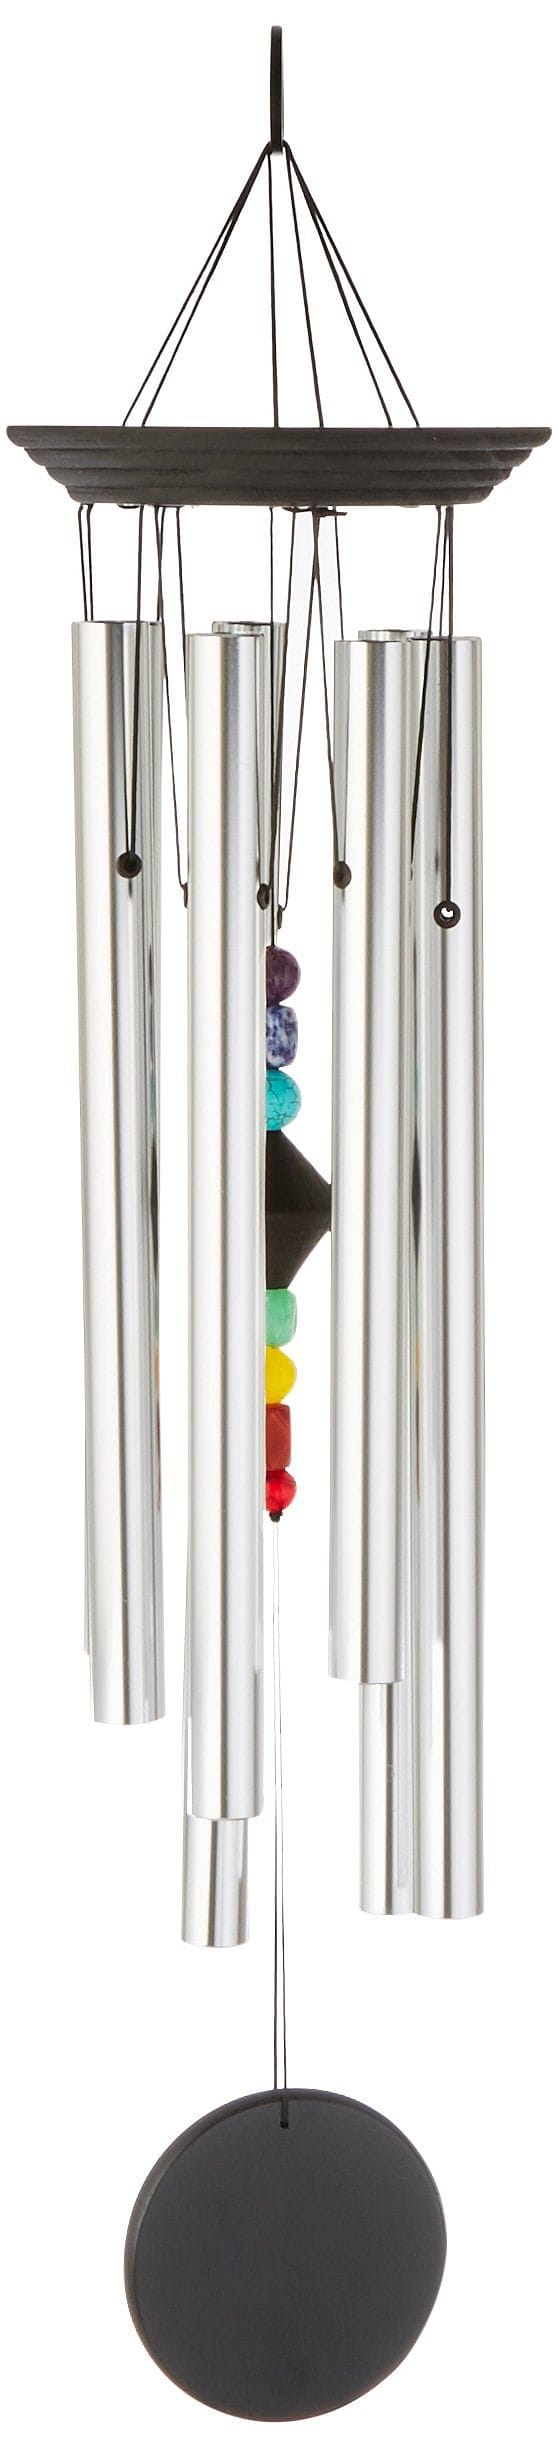 Chakra Chimes - Seven Stones - Large - Shelburne Country Store